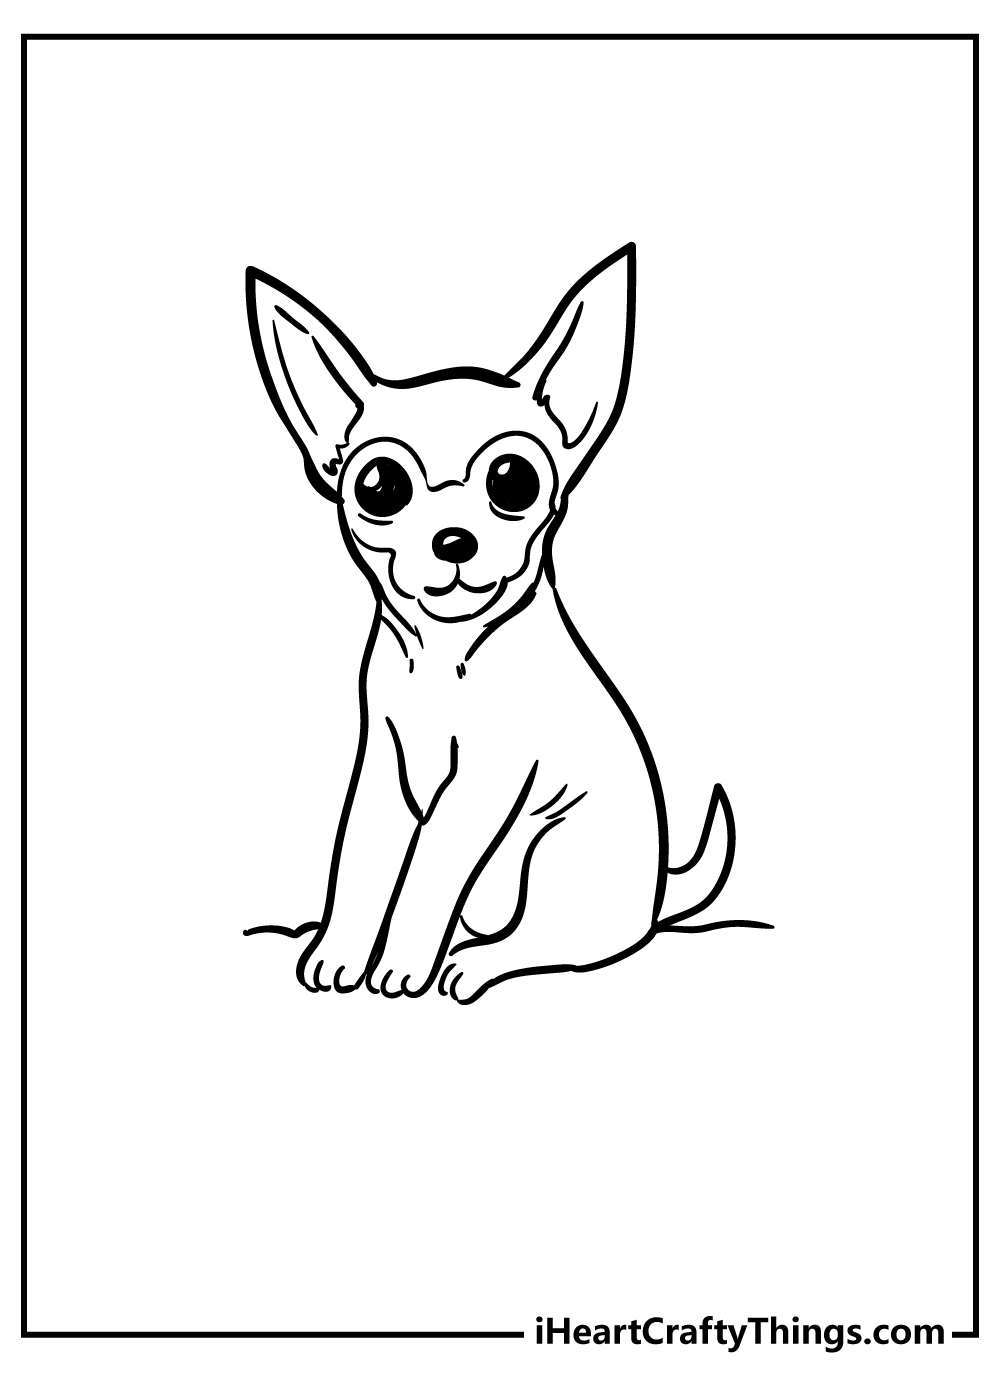 Chihuahua Coloring Sheet for children free download